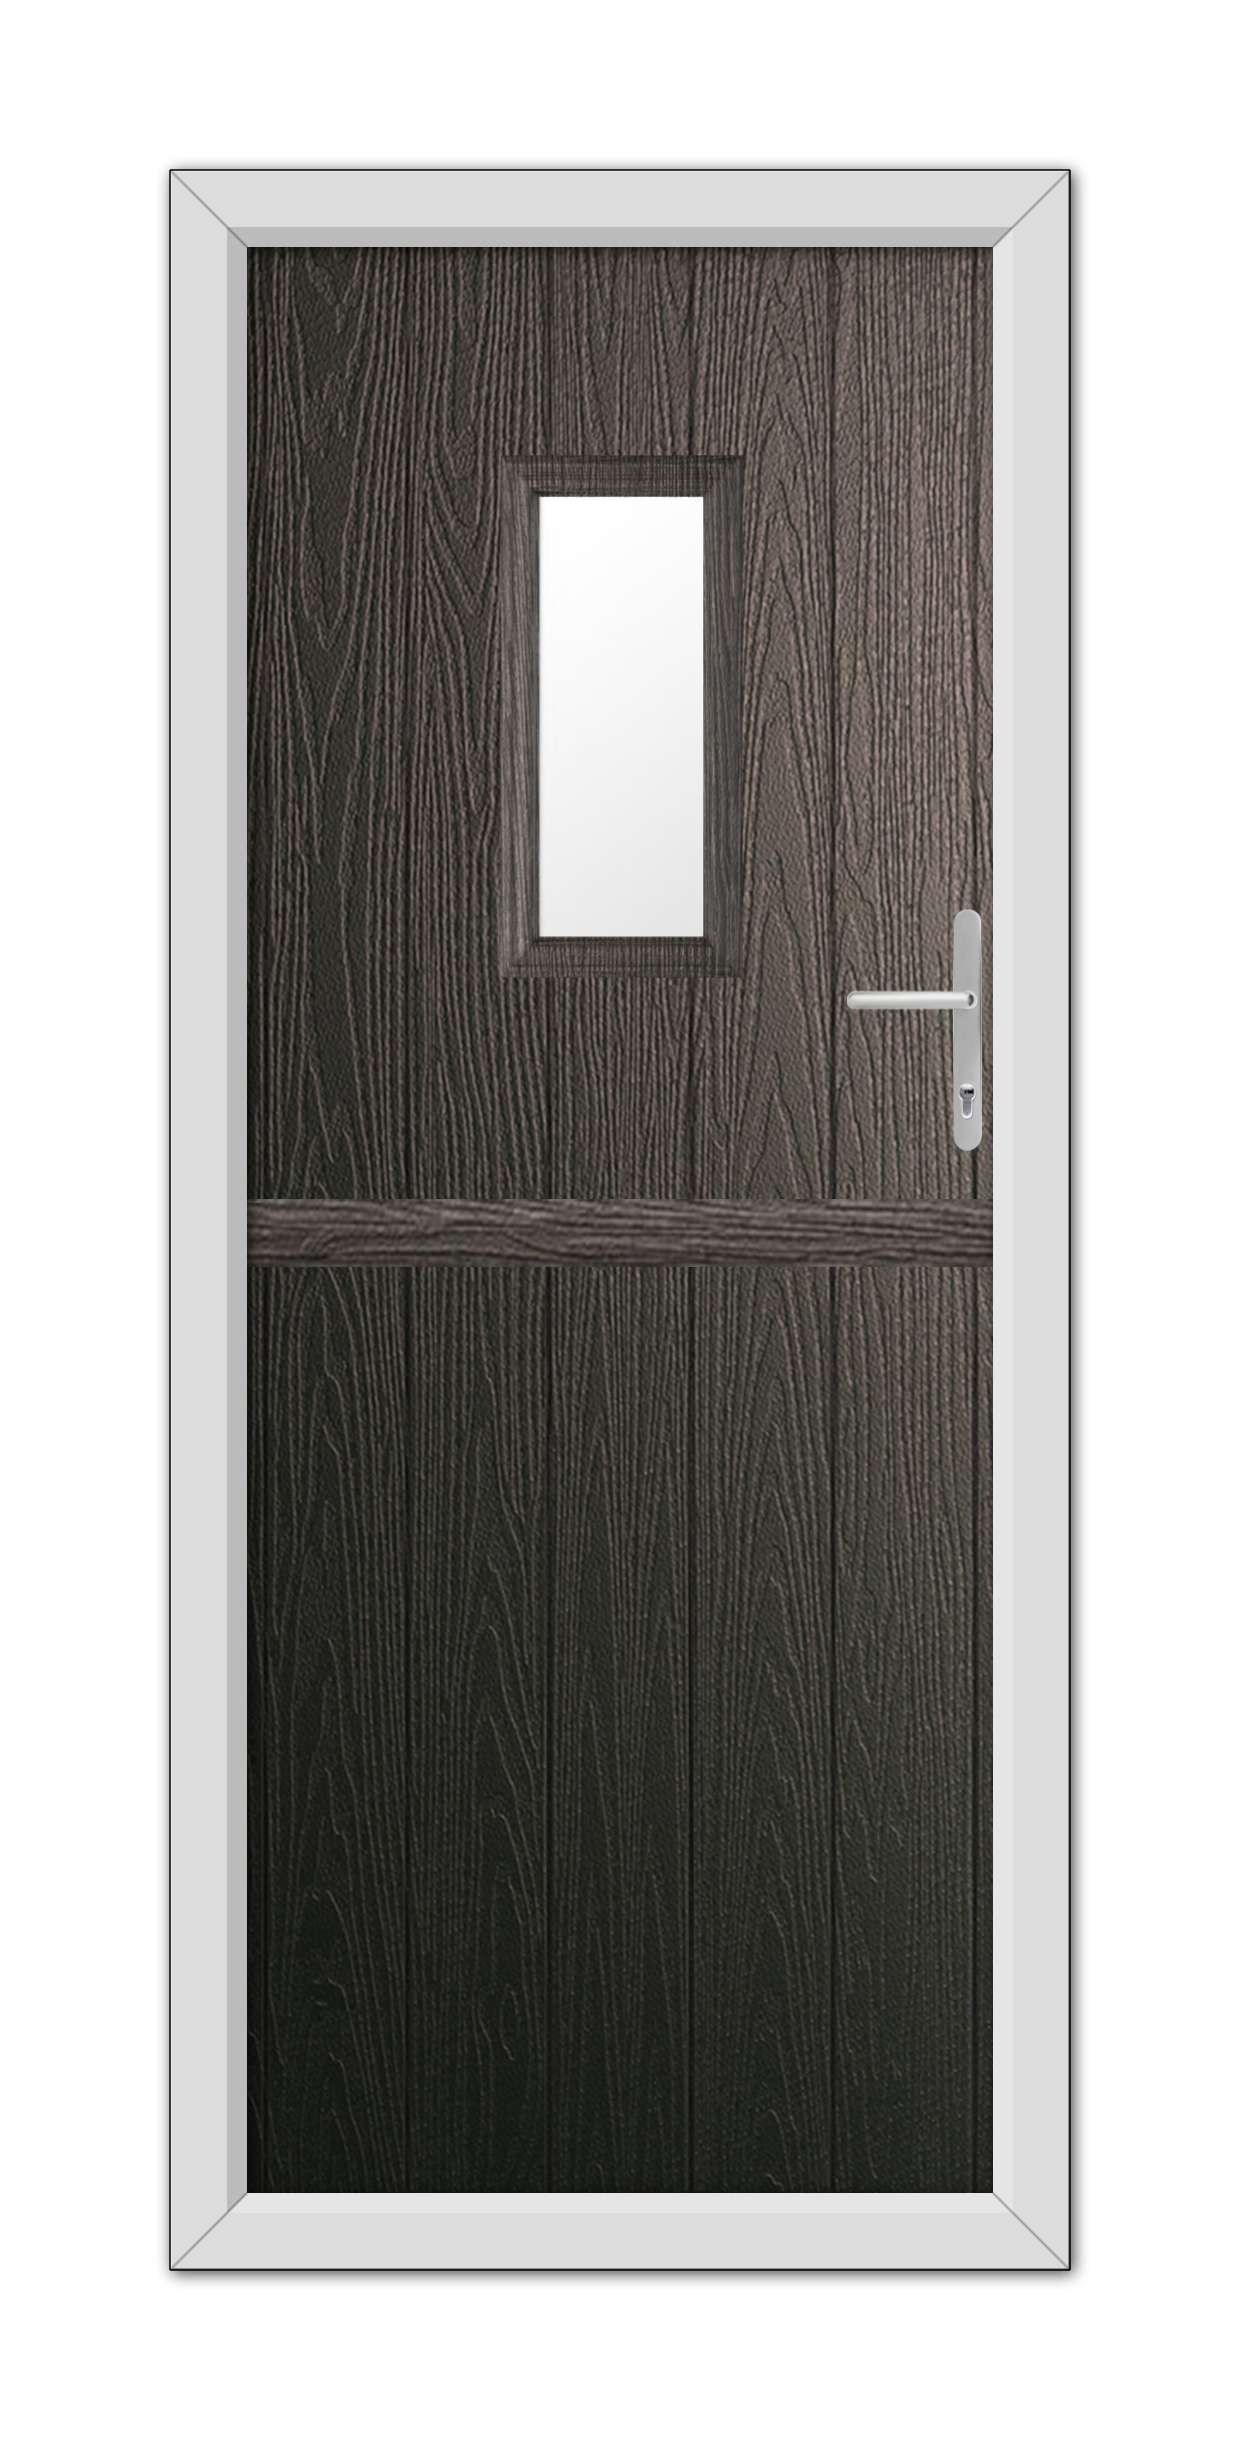 A Schwarzbraun Somerset Stable Composite Door 48mm Timber Core with a small square window and a metal handle, framed by a white border.